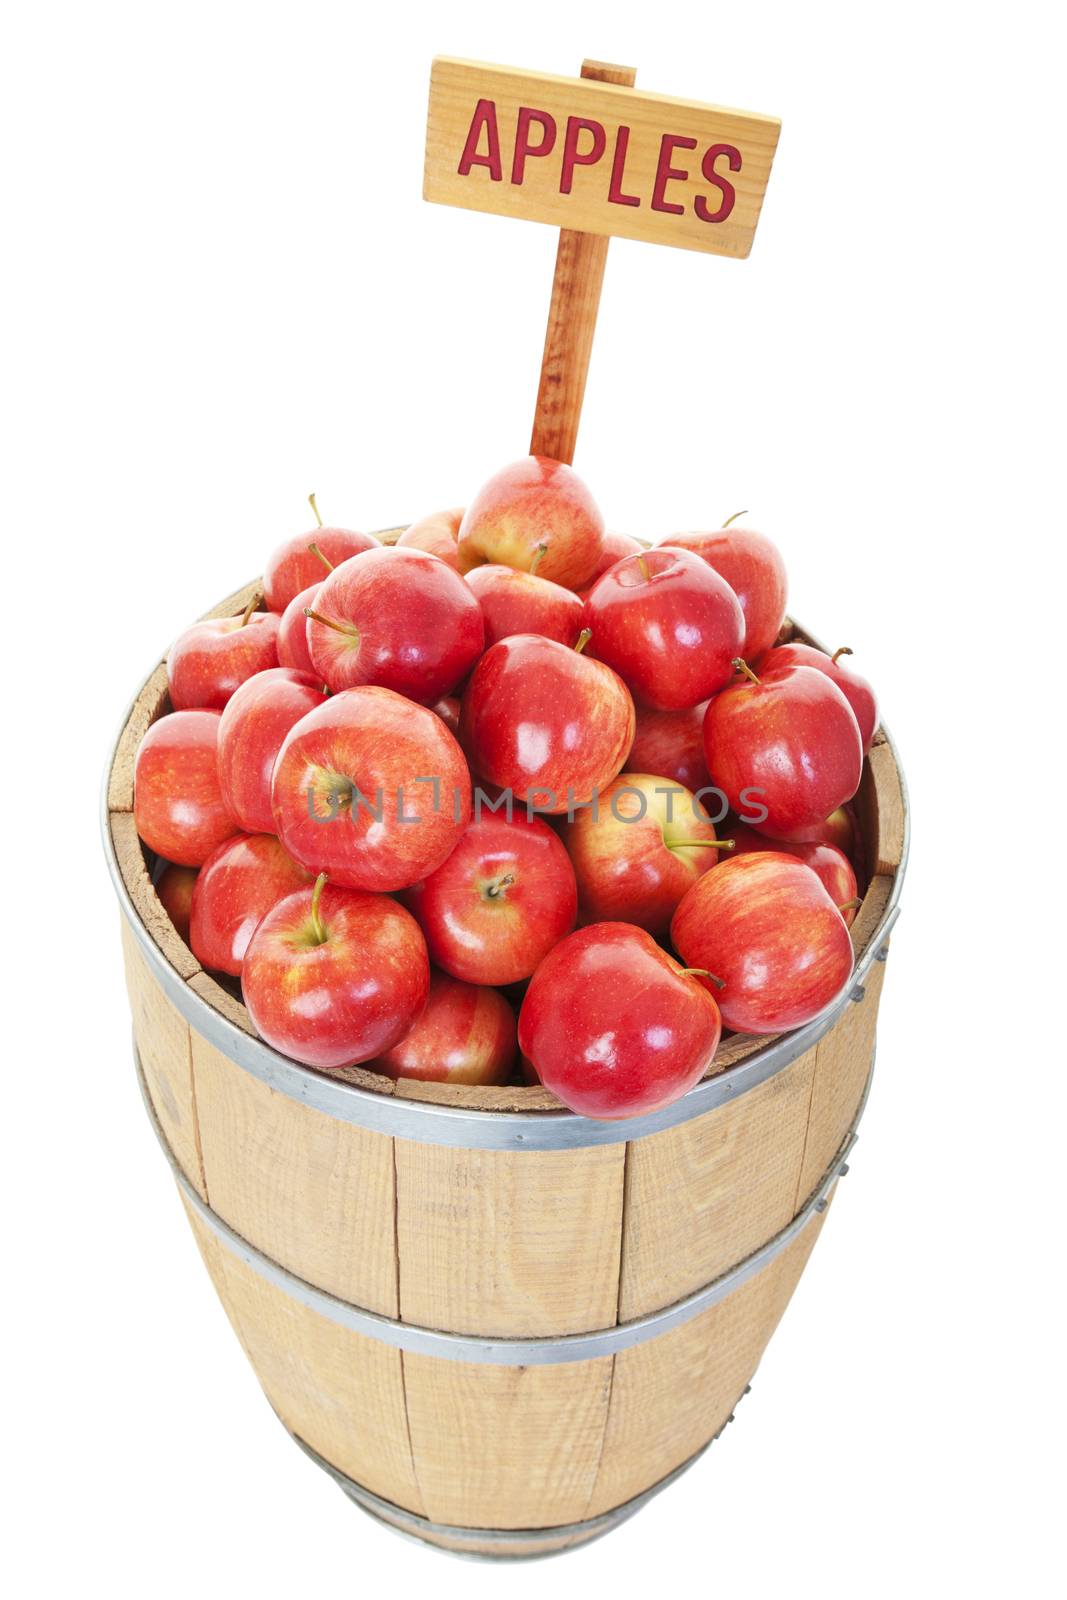 A market display of fresh apples in a  large wooden barrel.  Shot on white background.